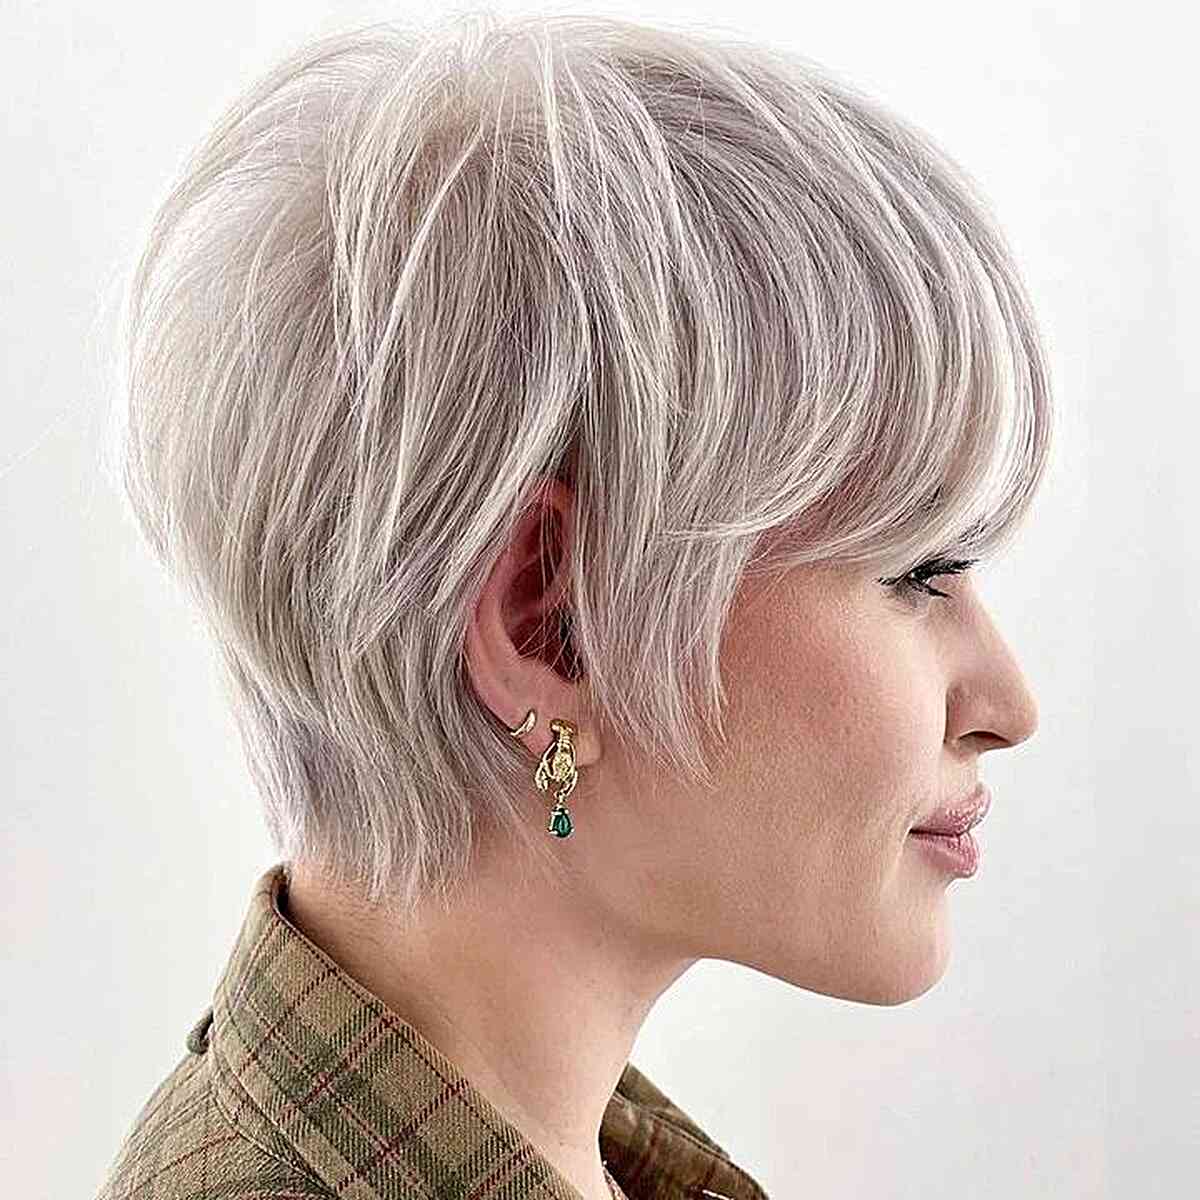 Short Platinum-Toned Layered Long Pixie for women with an edgy style